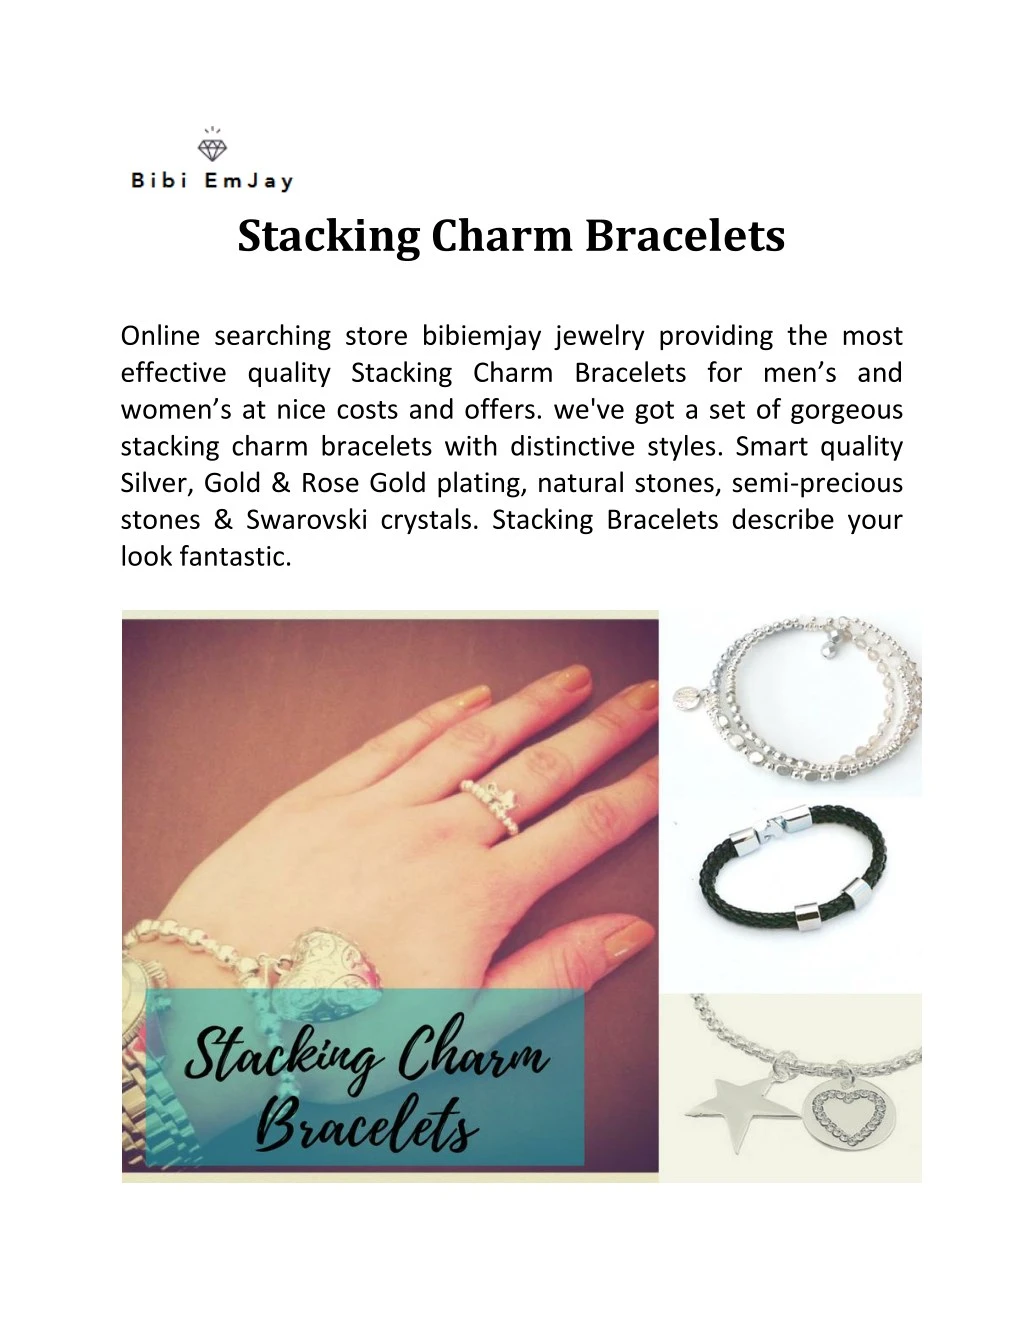 stacking charm bracelets online searching store